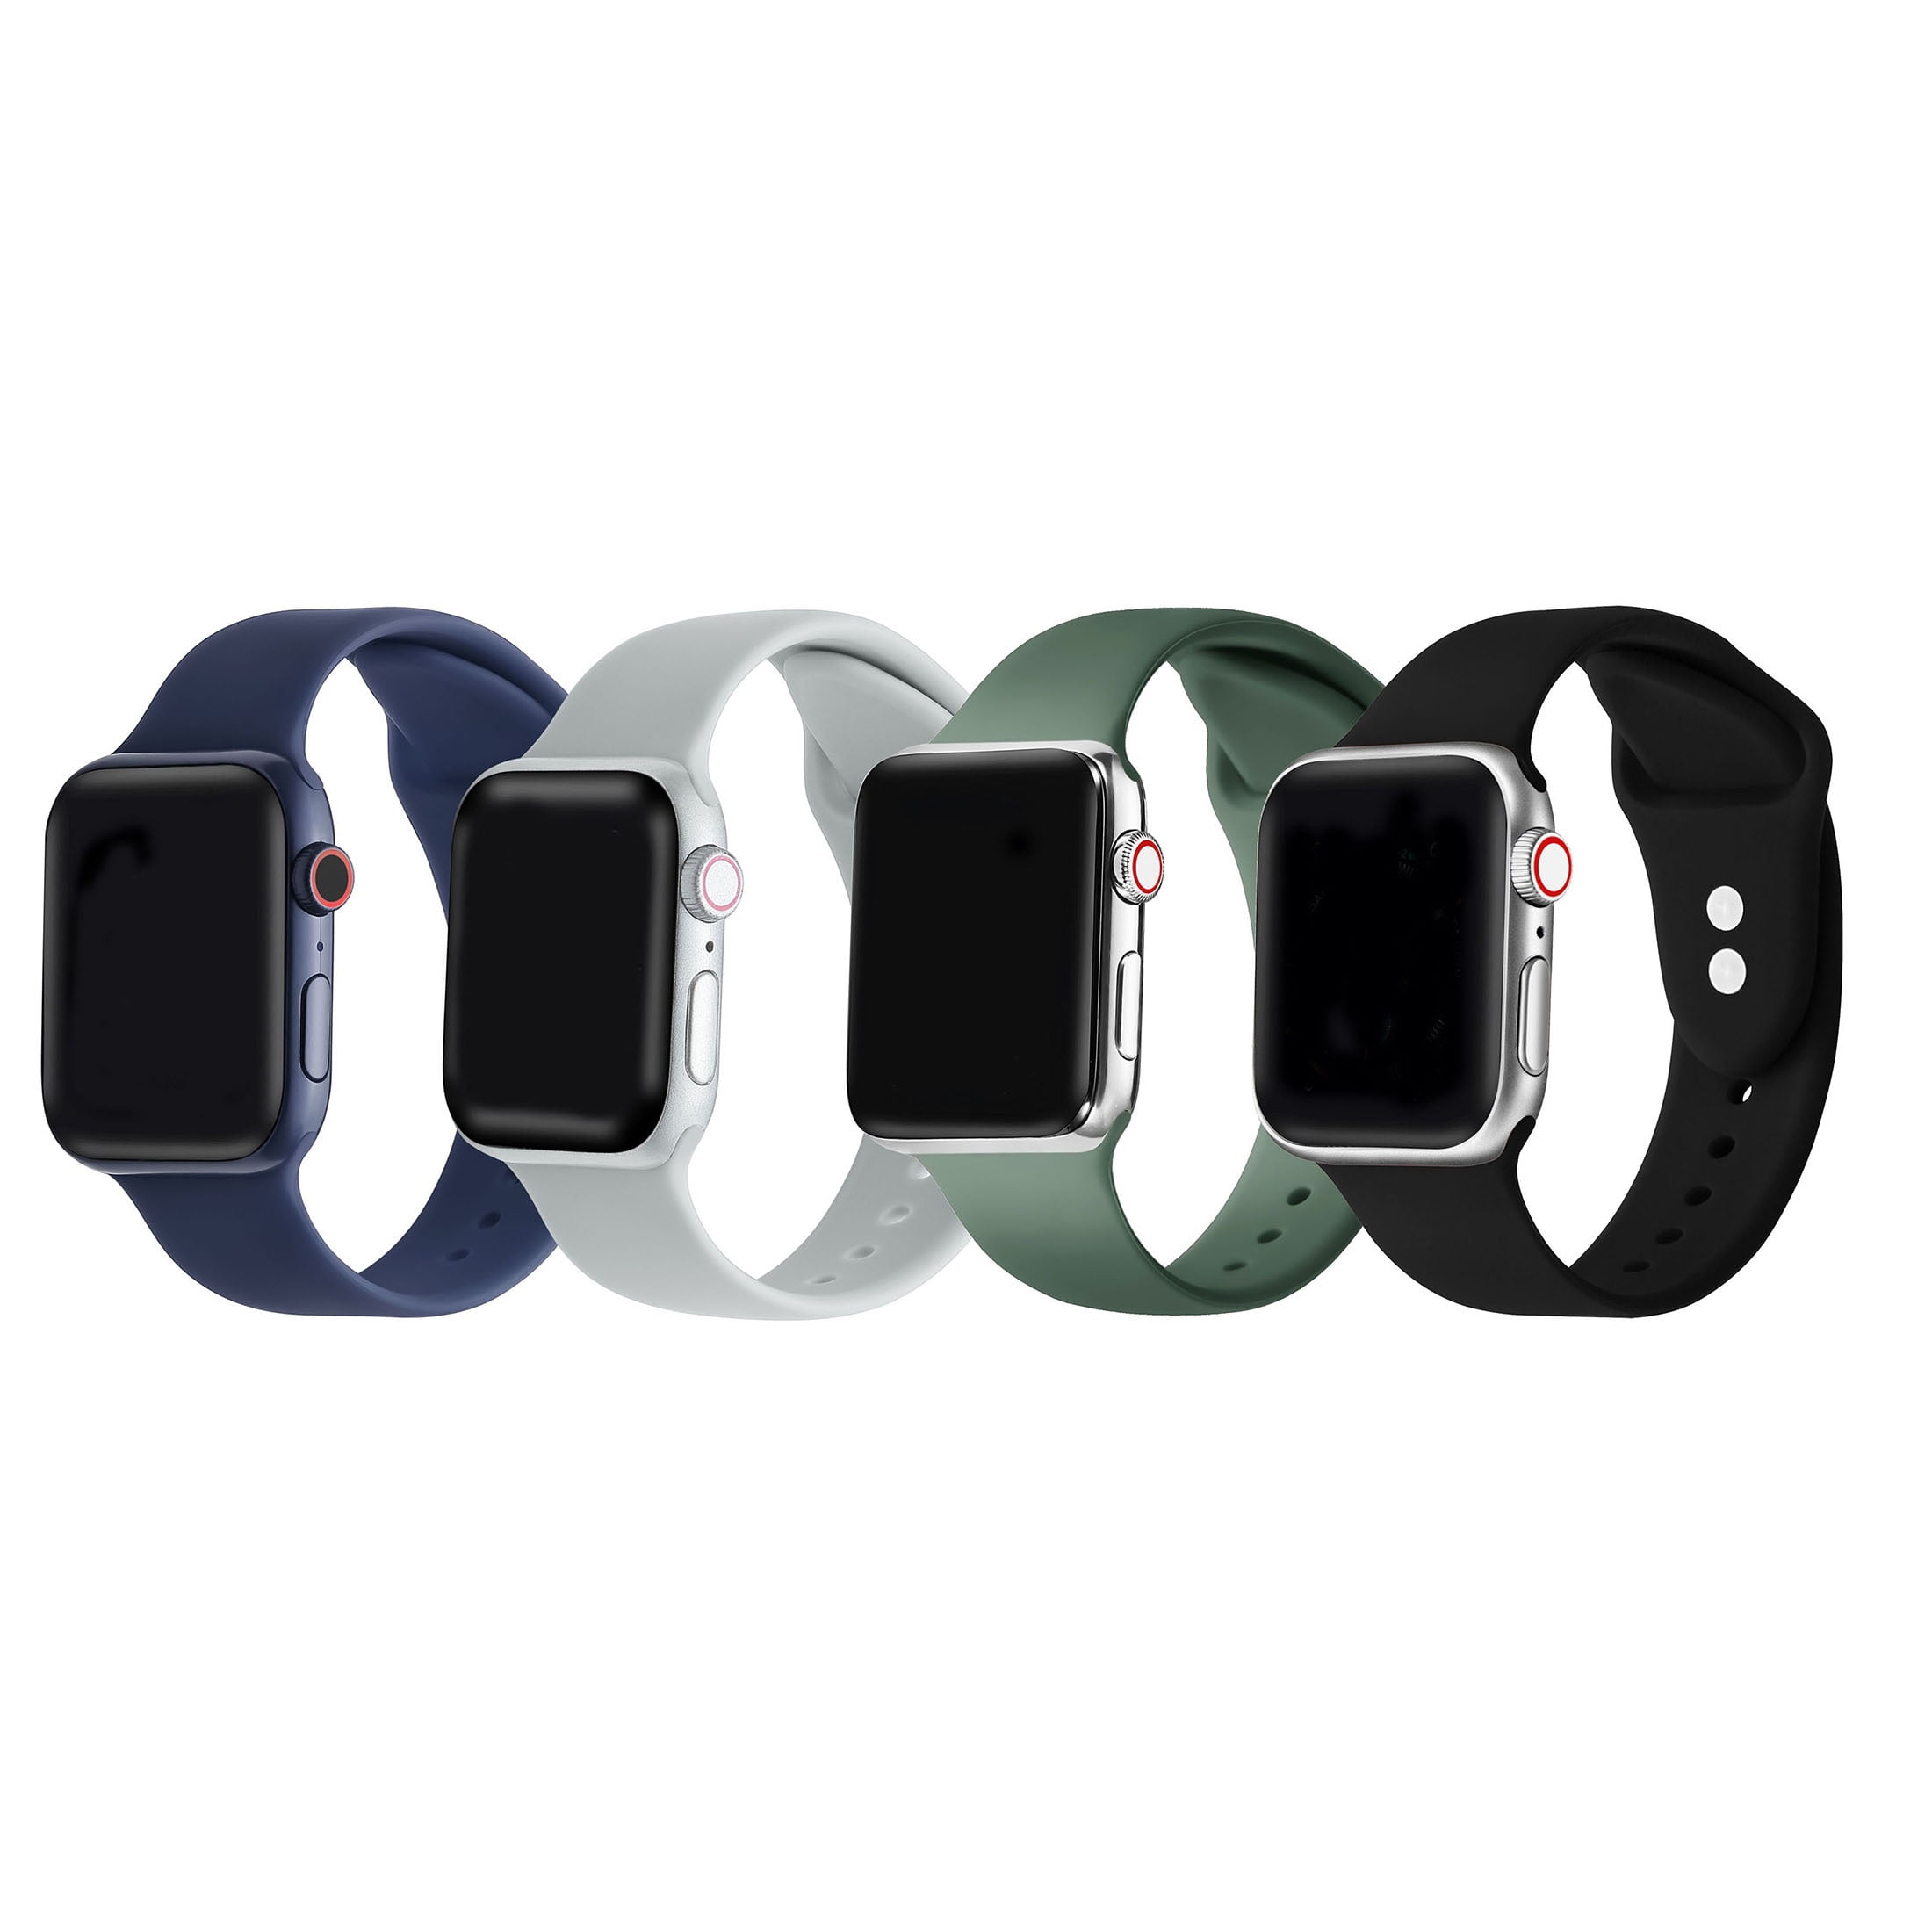 Apple Watch silicone band